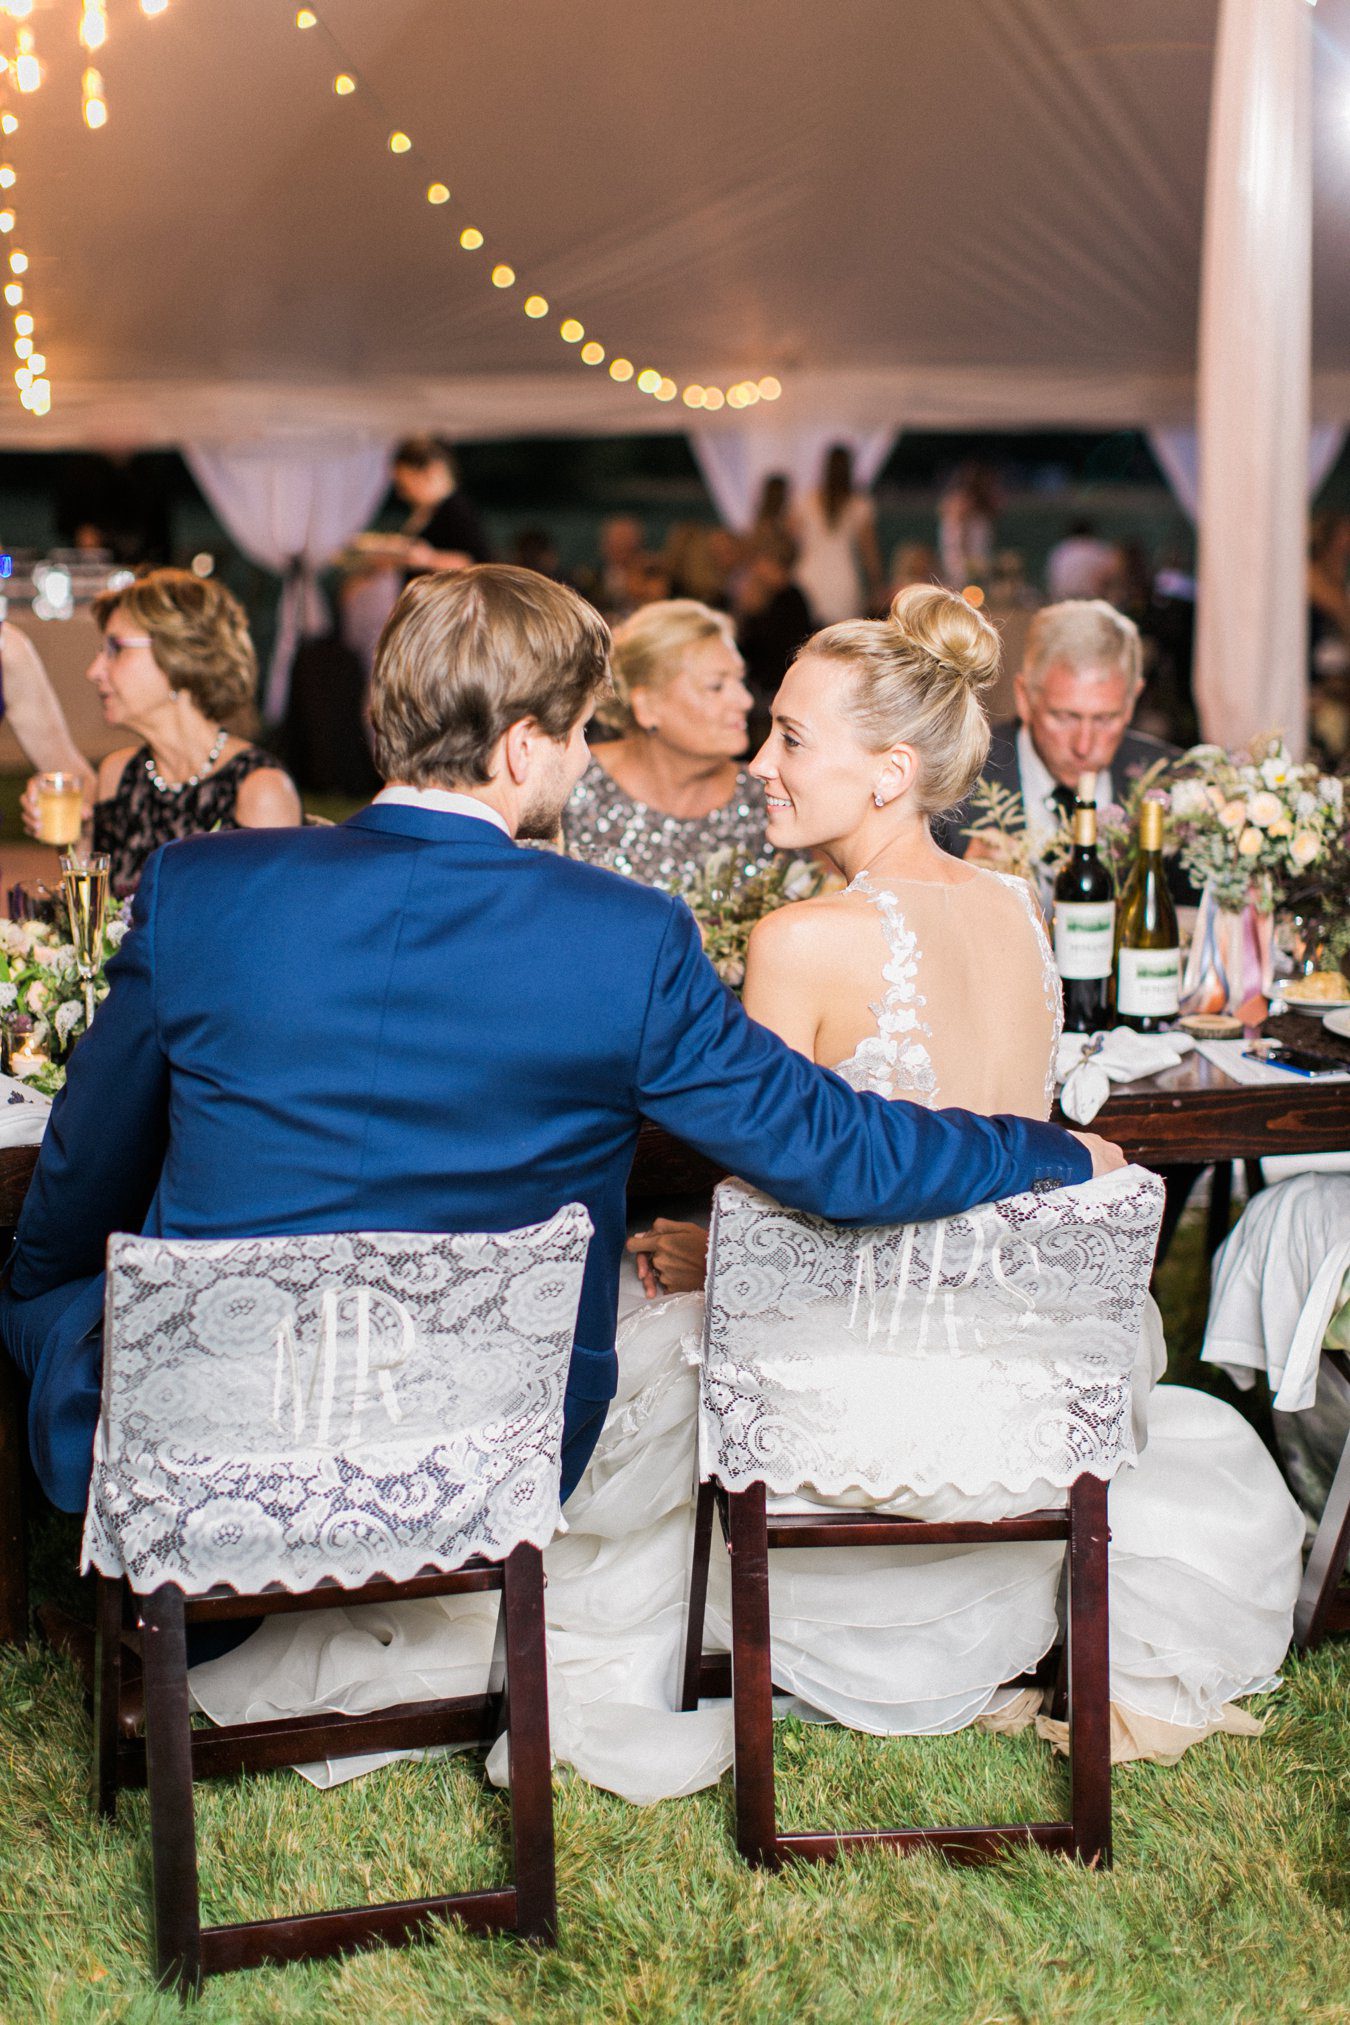 Lace Mr. and Mrs. Chair covers | Cory Weber Photography